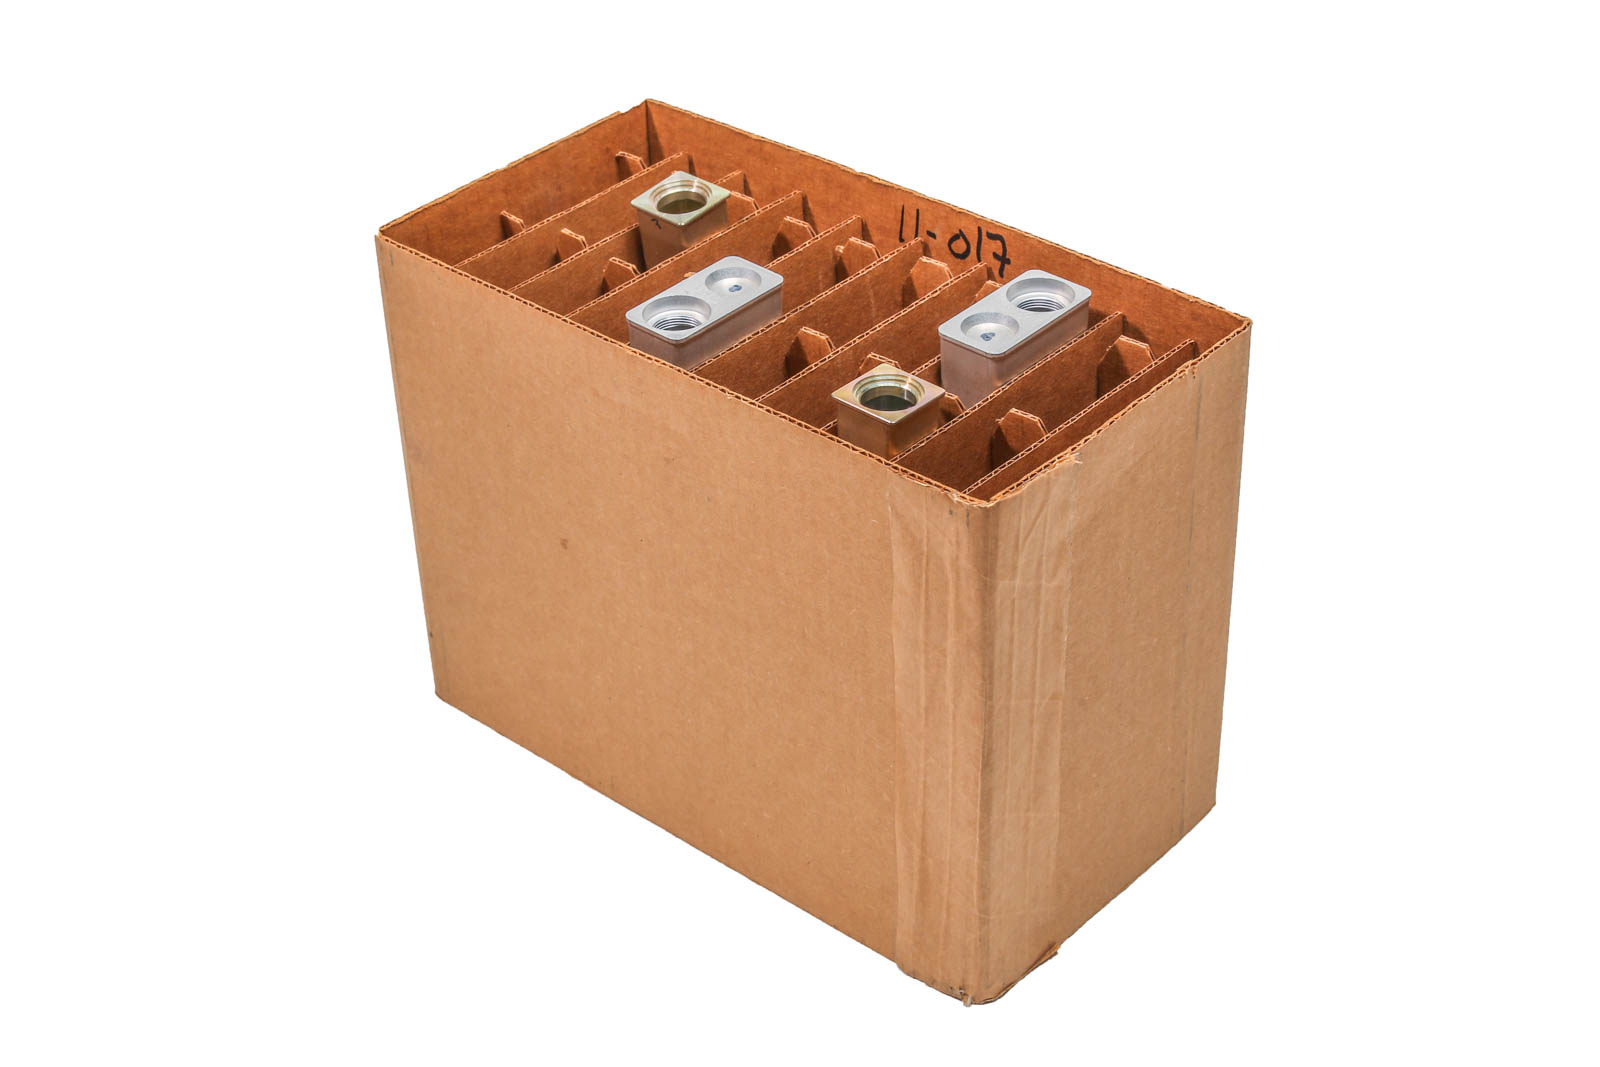 https://www.altamax.net/resize/Shared/Images/Product/Corrugated-Boxes/Corrugated-Box-with-Separator.jpg